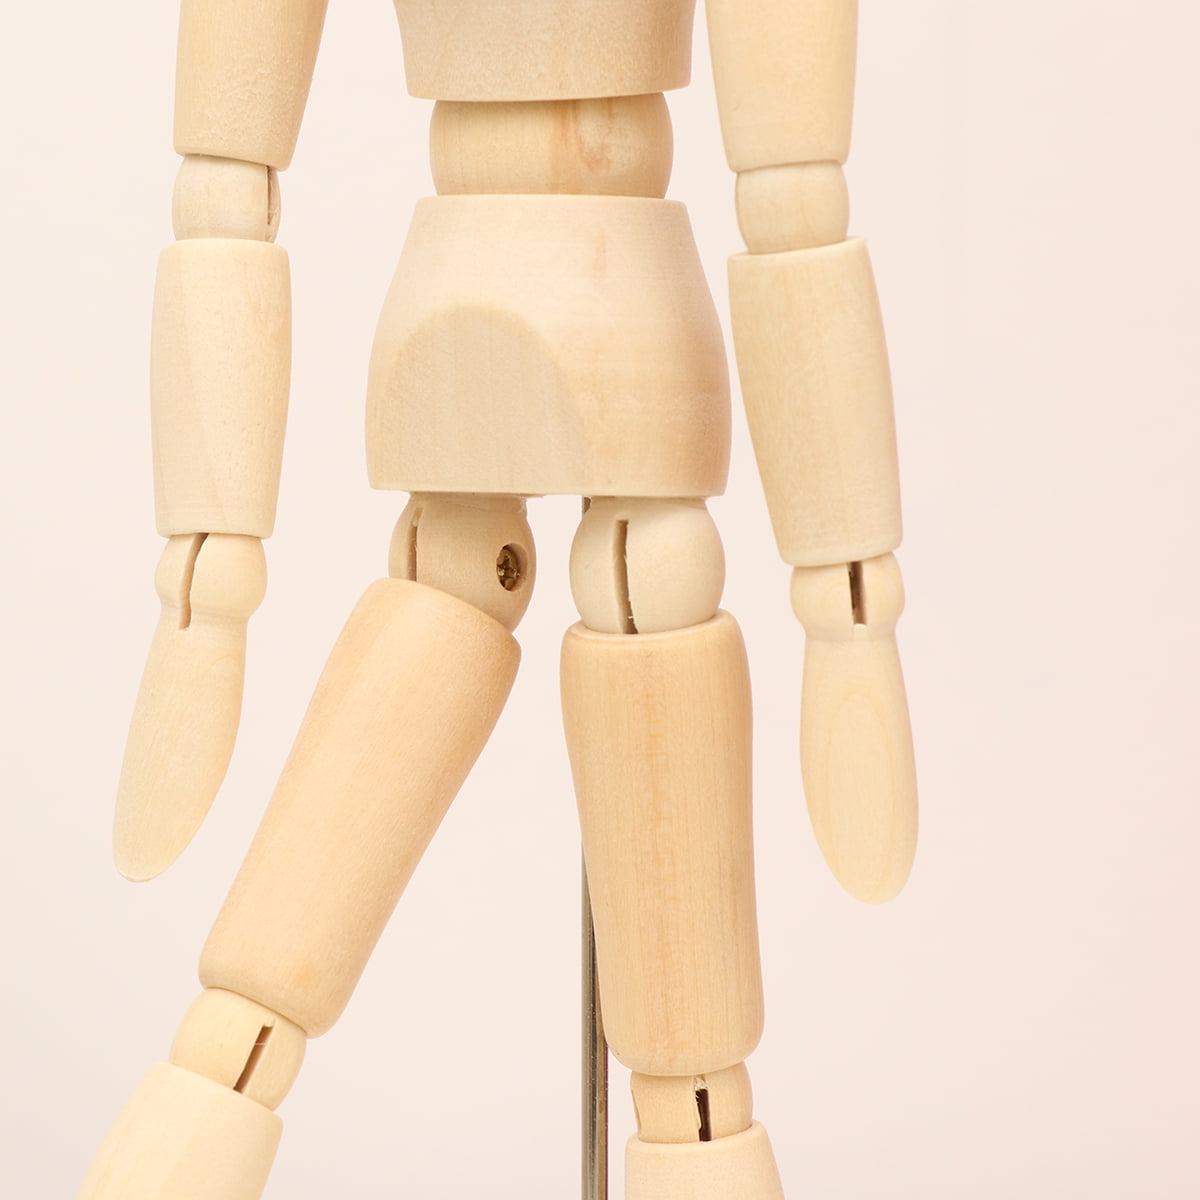 1pc Yellow Wooden Mannequin Figure With Joints & Fingers, For